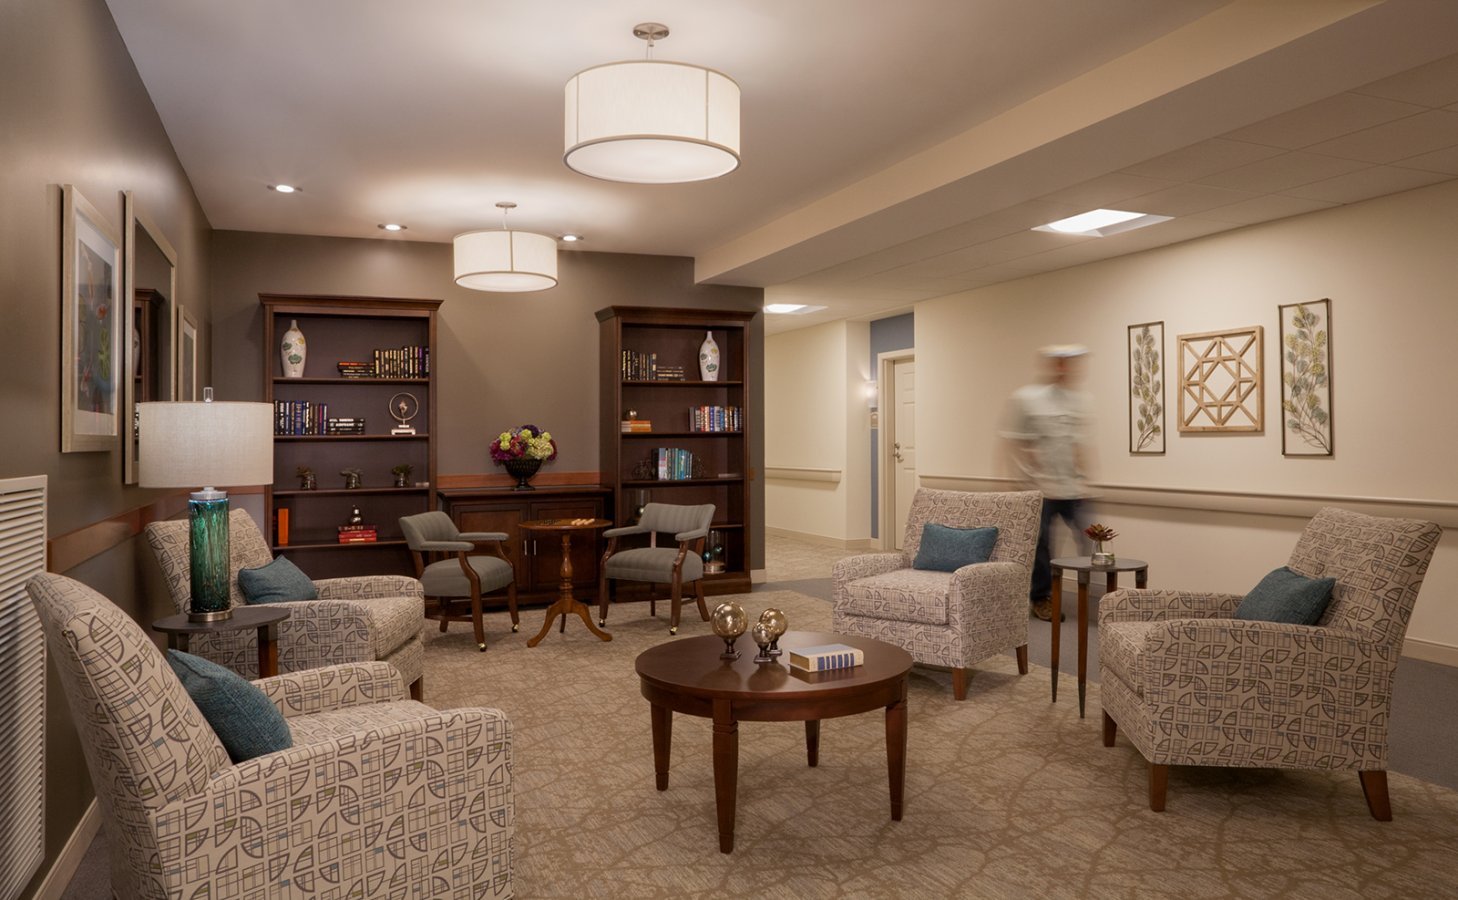 How To Design Senior Living Facilities that Support the Aging Population